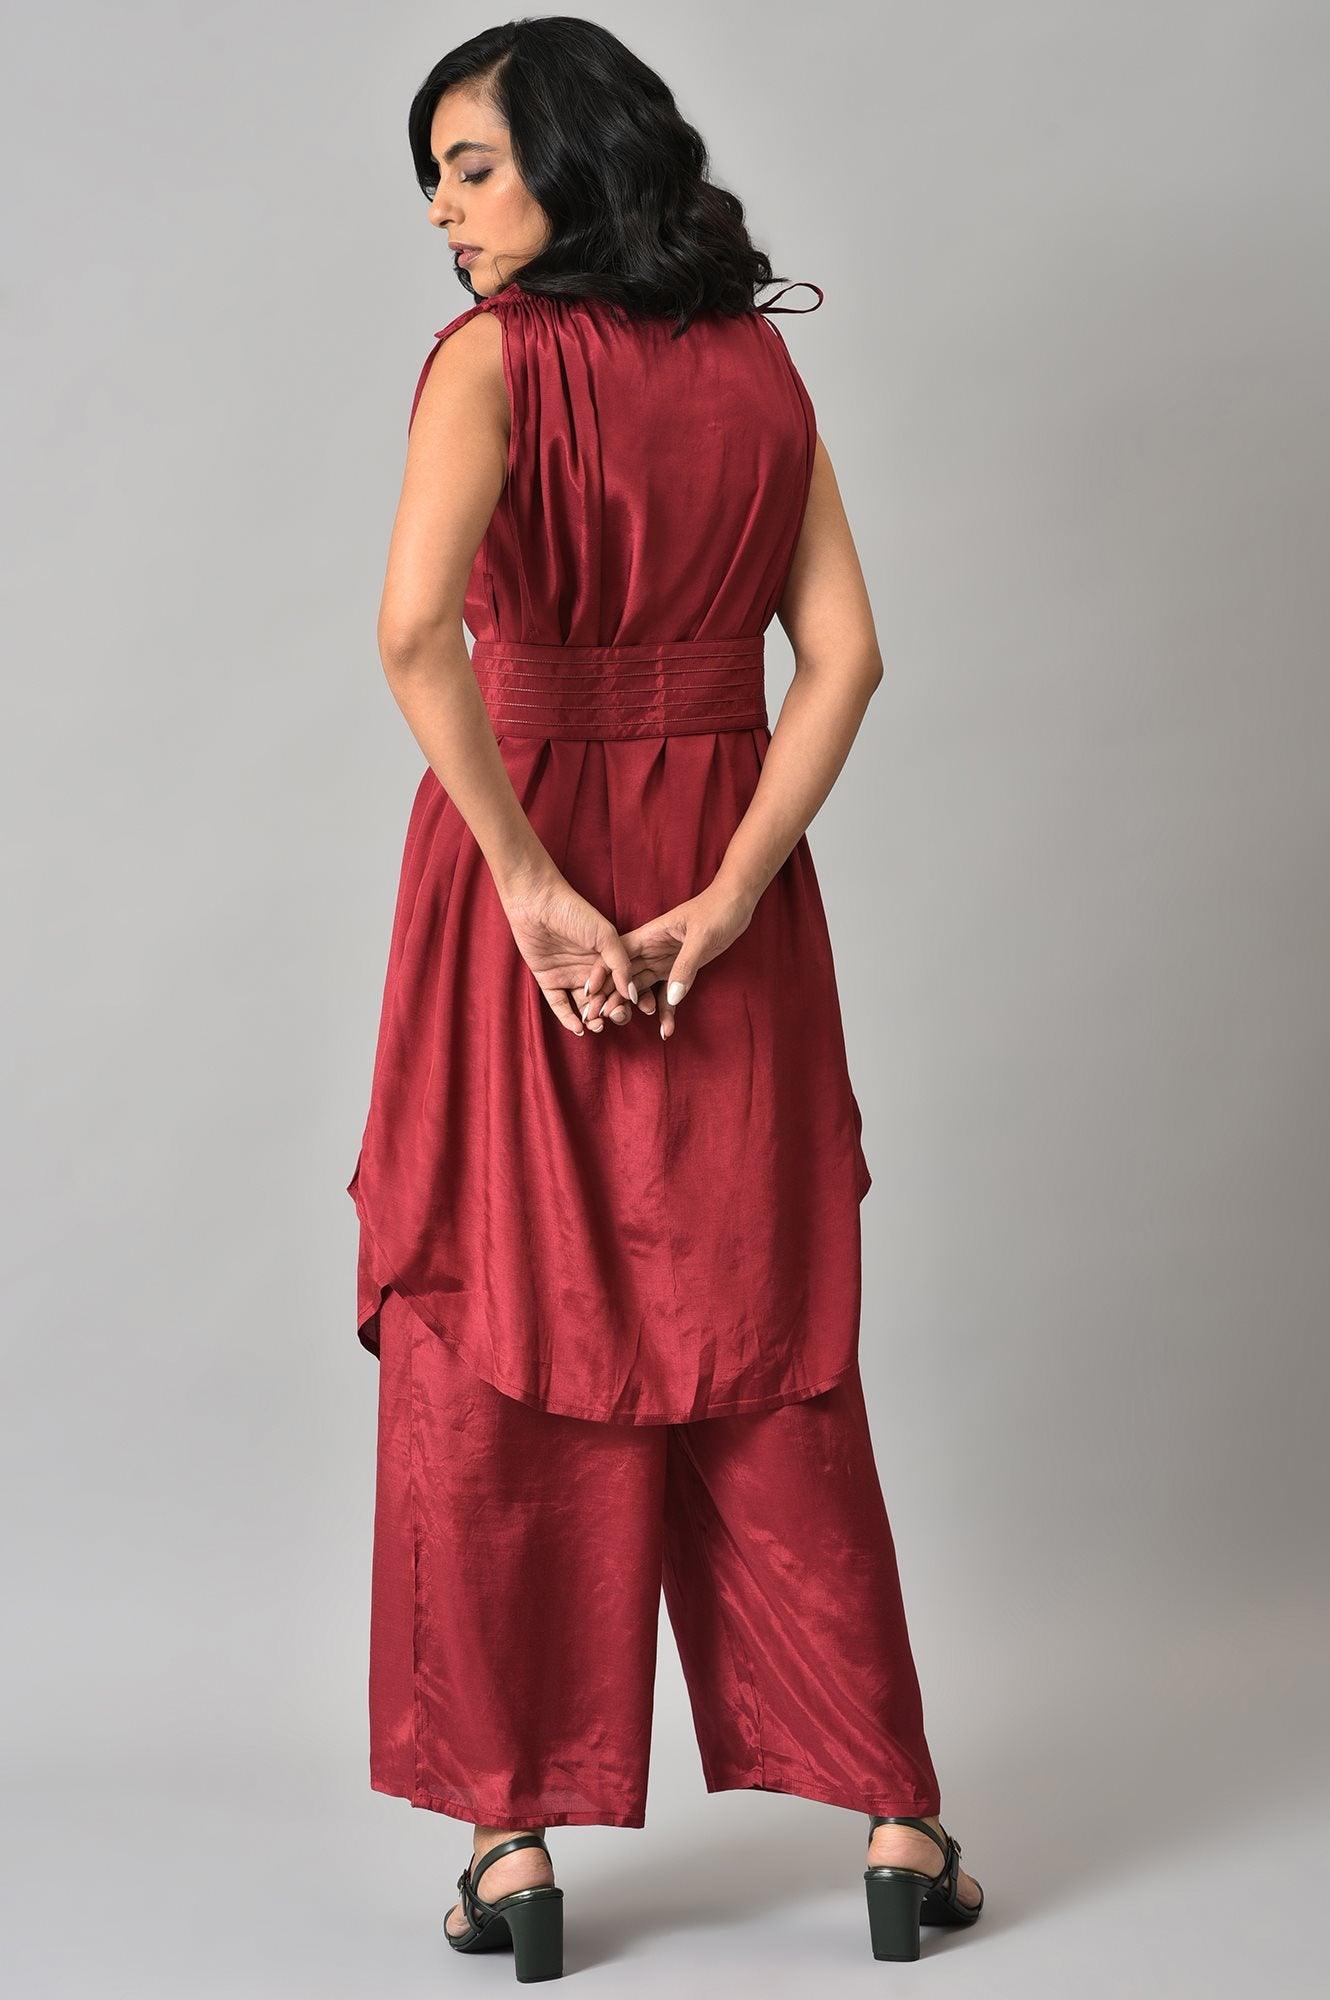 Dark Red Solid Shantung kurta with Parallel Pants Co-ord Set - wforwoman